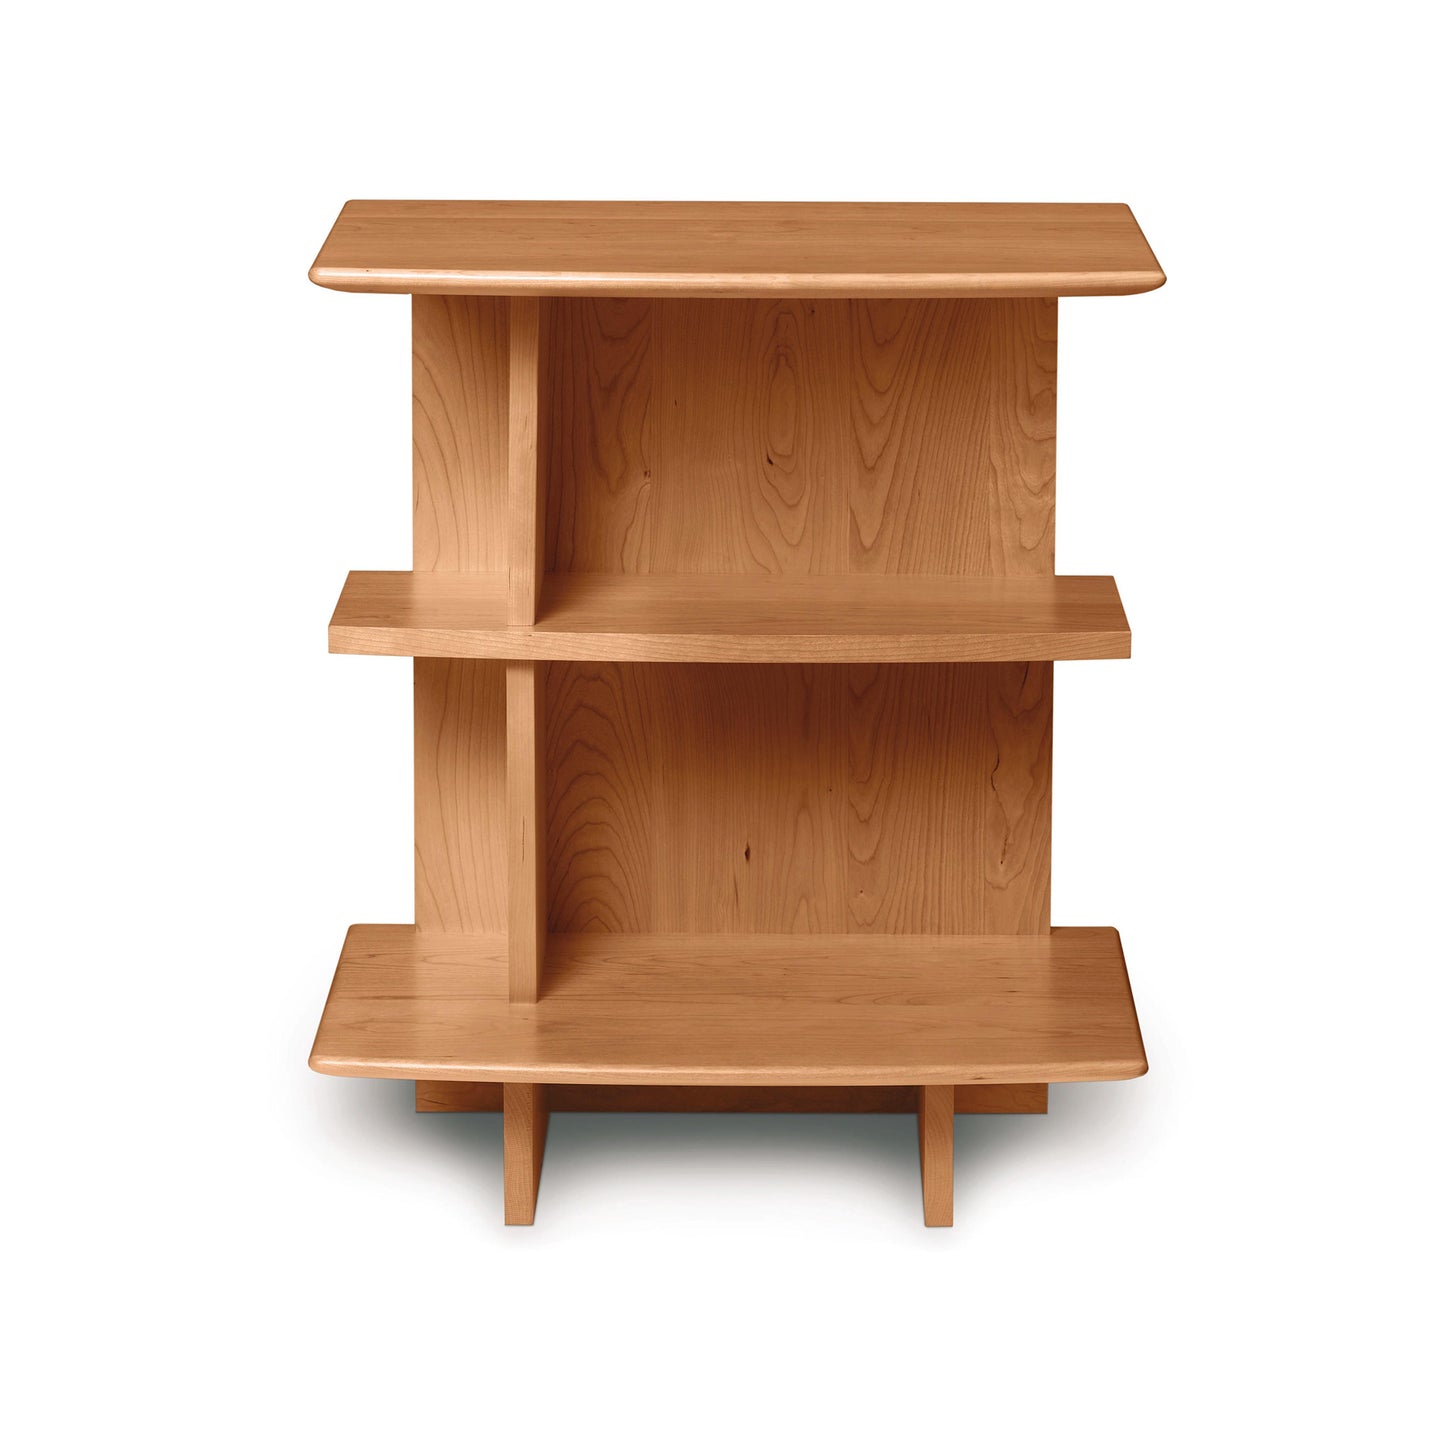 A simple wooden three-tiered shelf from the Copeland Furniture Sarah Open Shelf Nightstand Collection with a flat top and short legs, isolated on a white background.